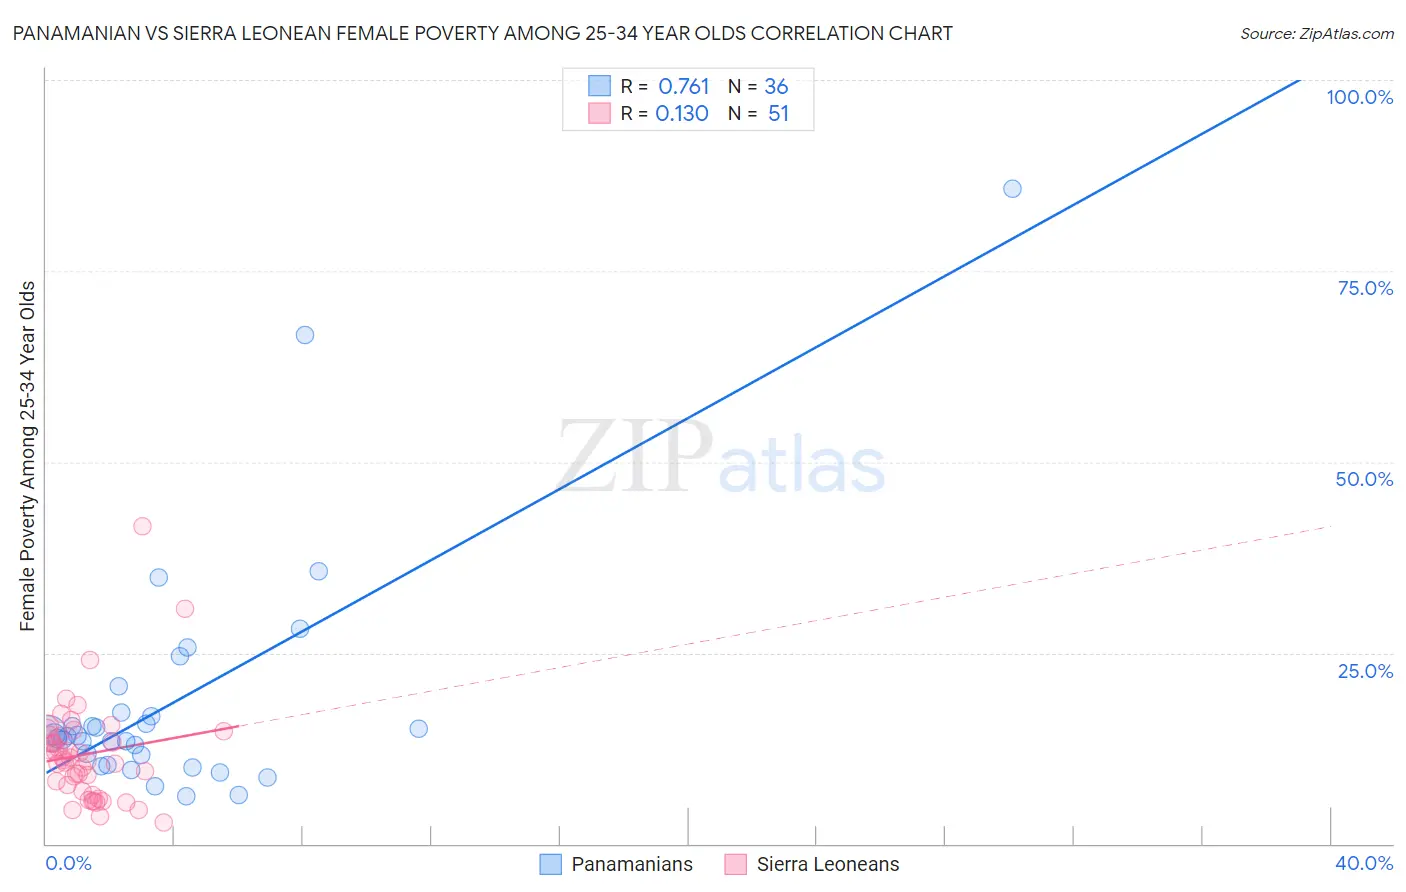 Panamanian vs Sierra Leonean Female Poverty Among 25-34 Year Olds